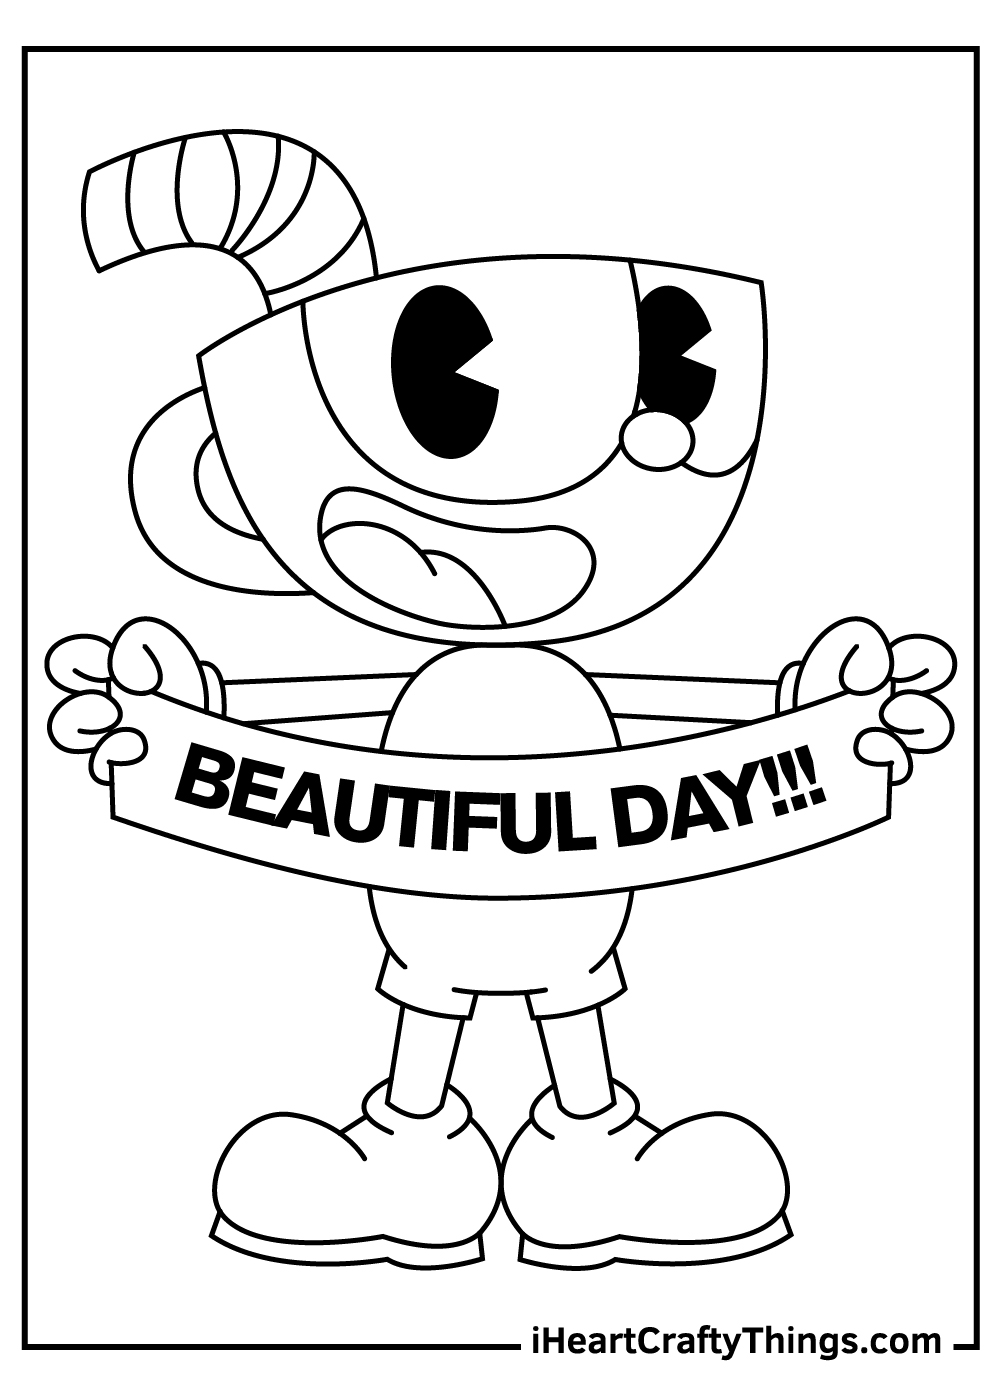 Cuphead Coloring Pages (Updated 2021)